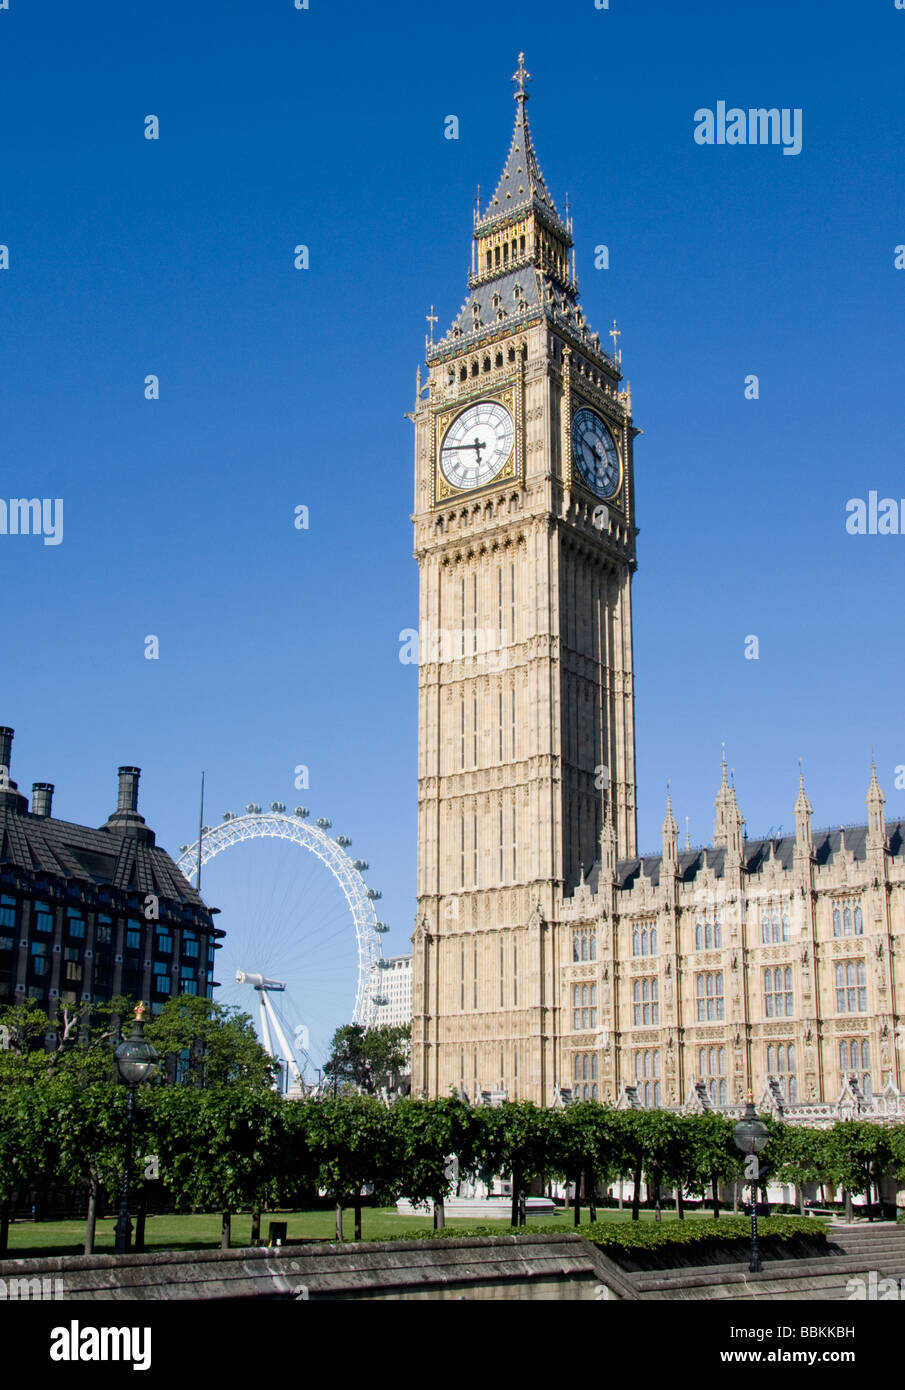 London Eye and Big Ben Houses of Parliament London England Stock Photo ...